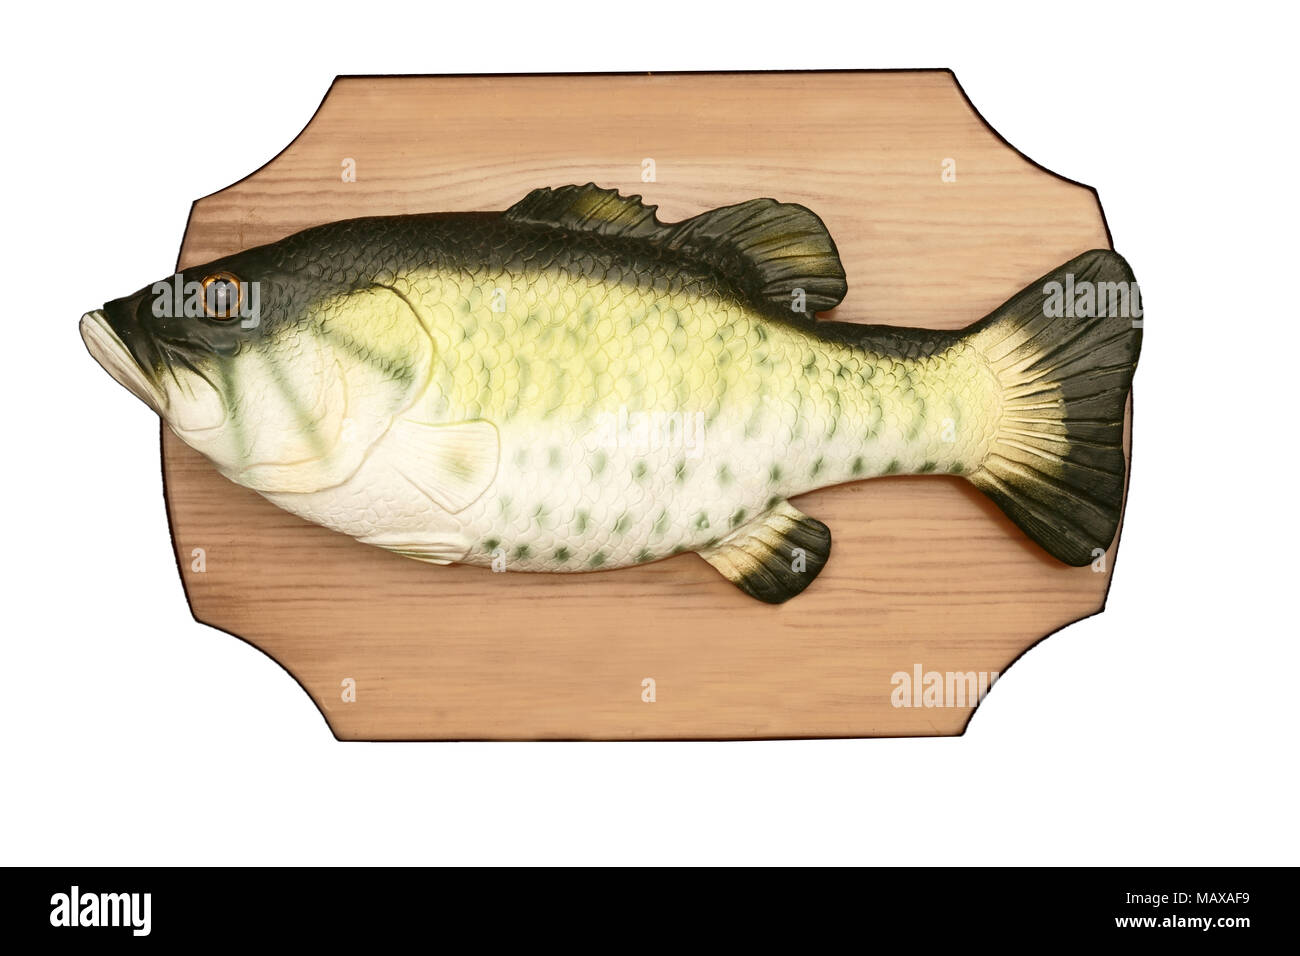 A rubber fish on a plate. Stock Photo